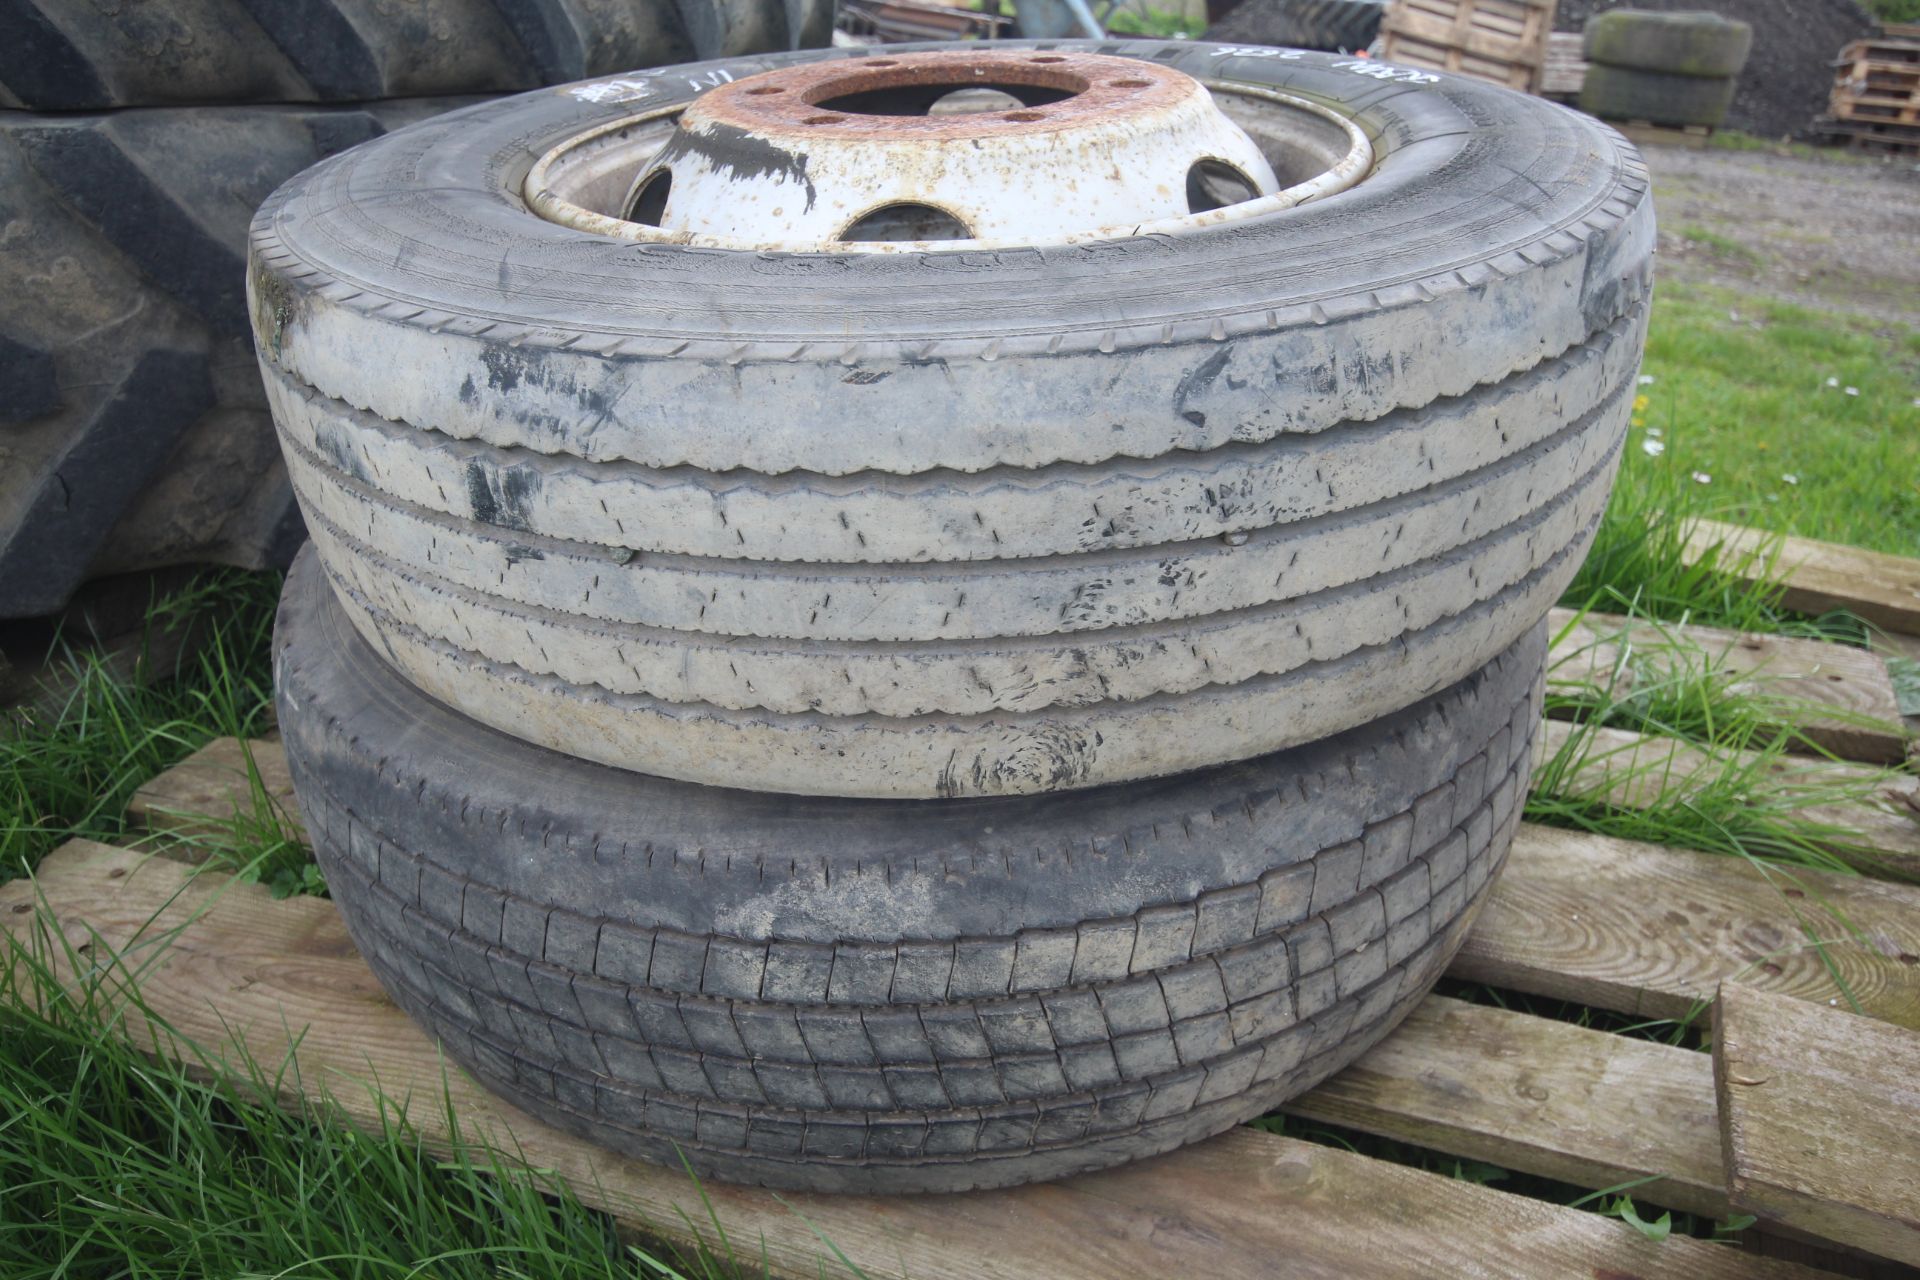 235/70R17.5 lorry wheel and tyre (requiring repair) and another. - Image 2 of 2